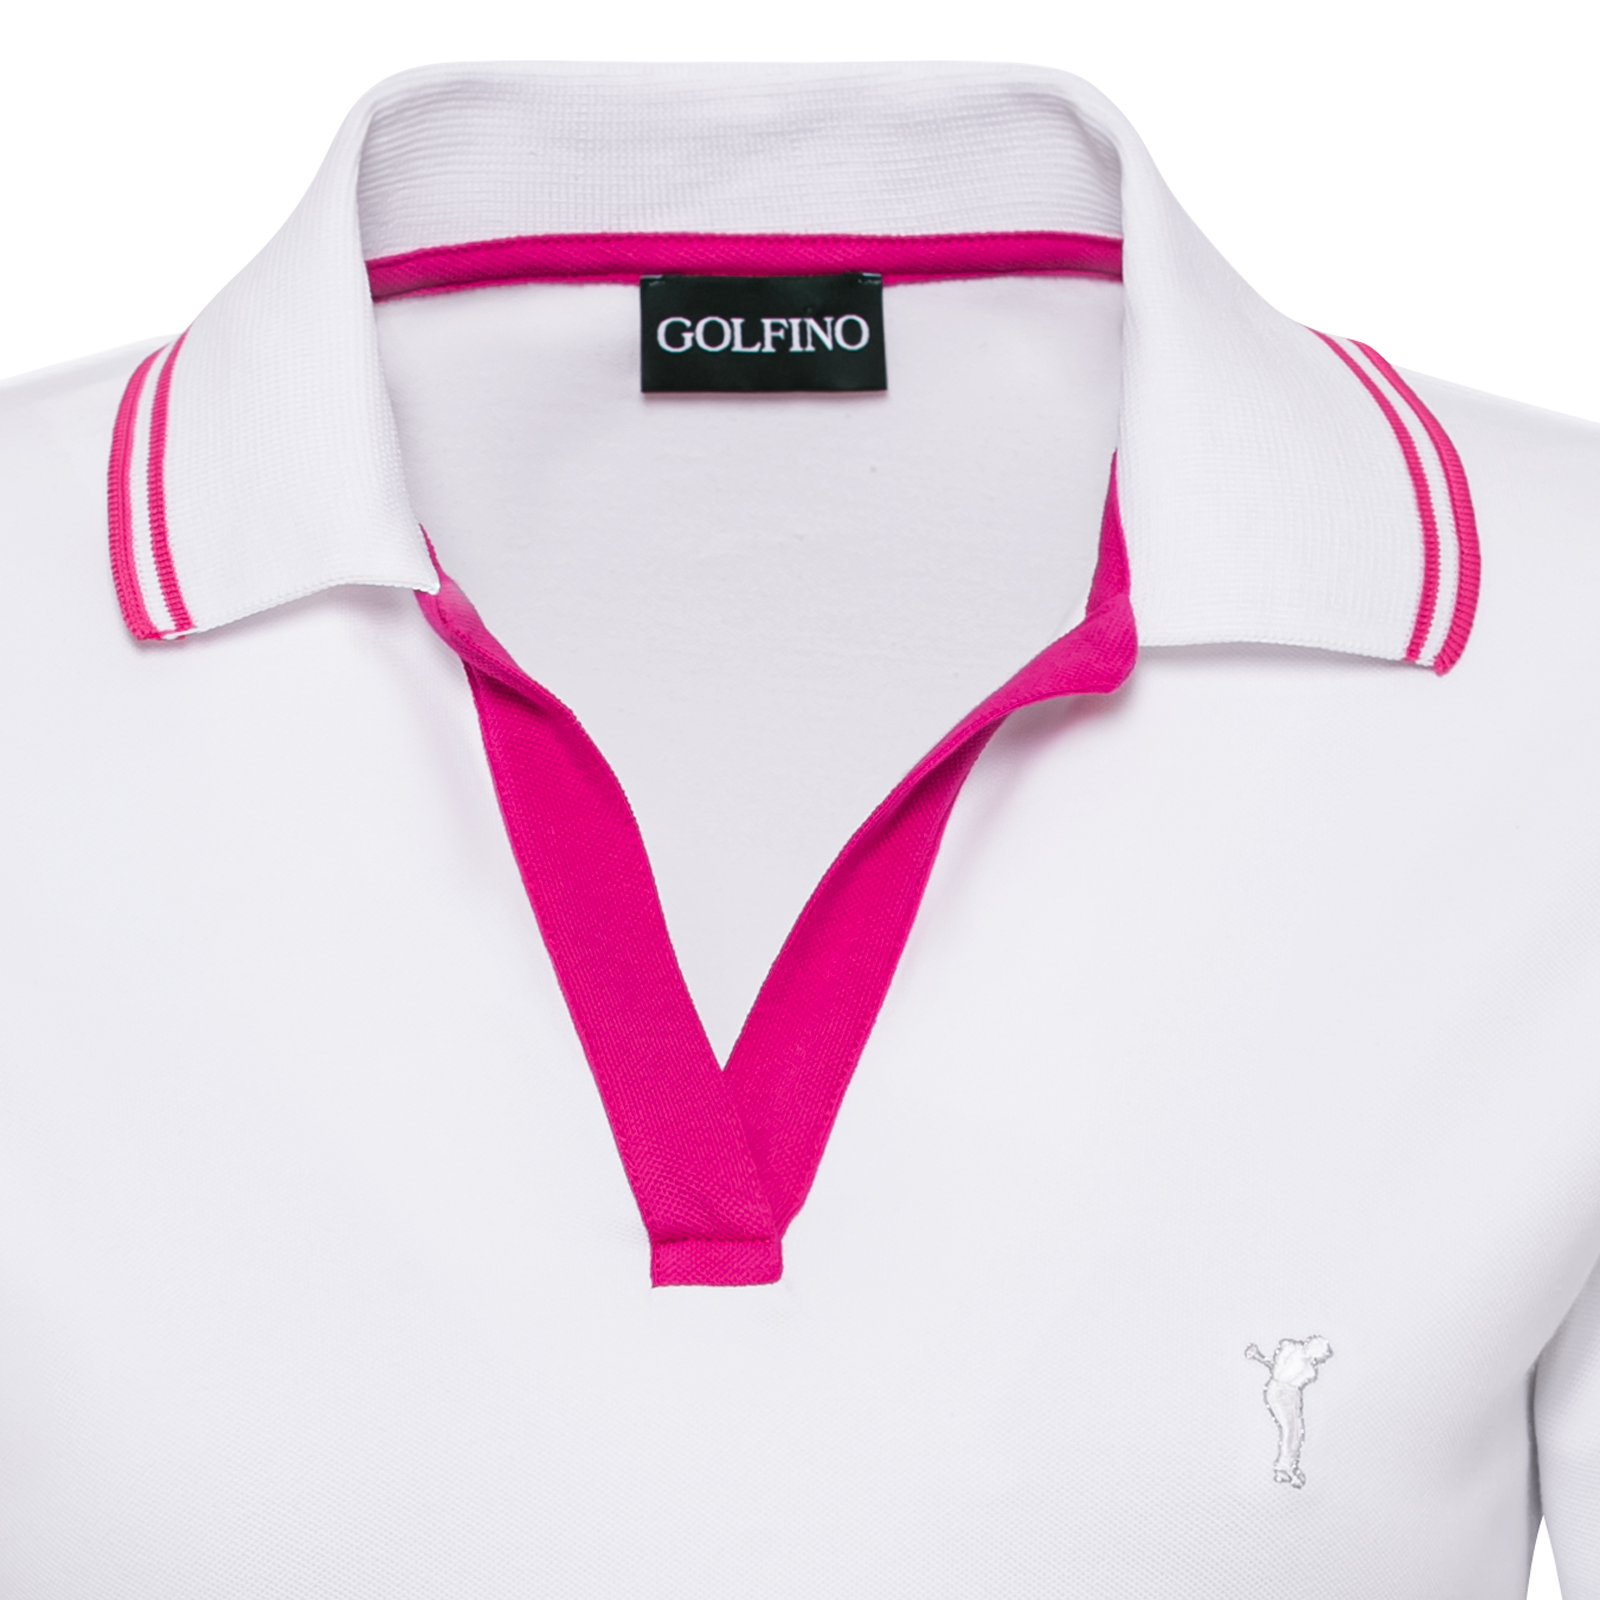 Ladies' golf shirt with sun protection